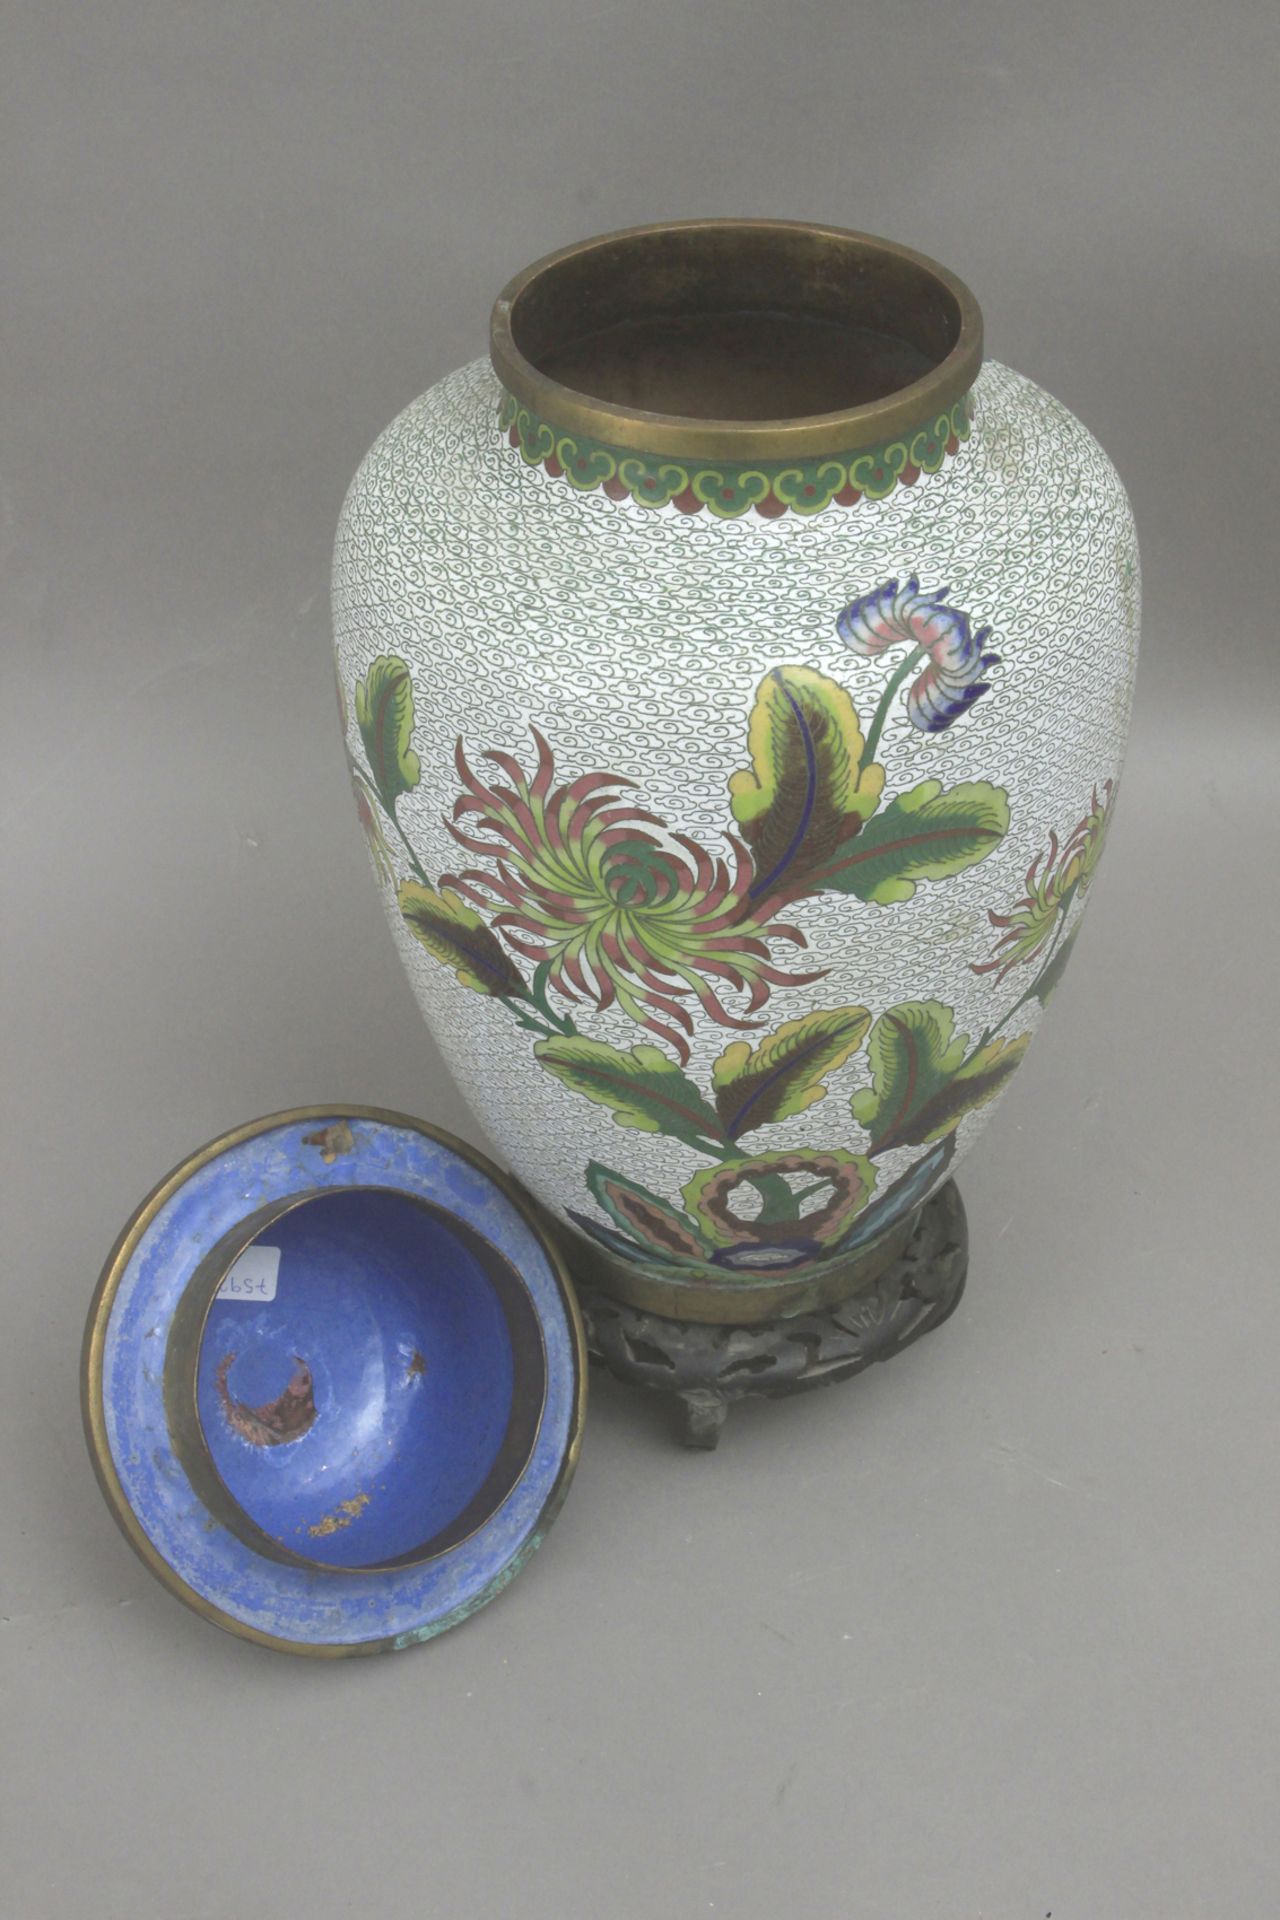 A 19th century Japanese tibor in bronze and cloisonné enamel - Image 3 of 4